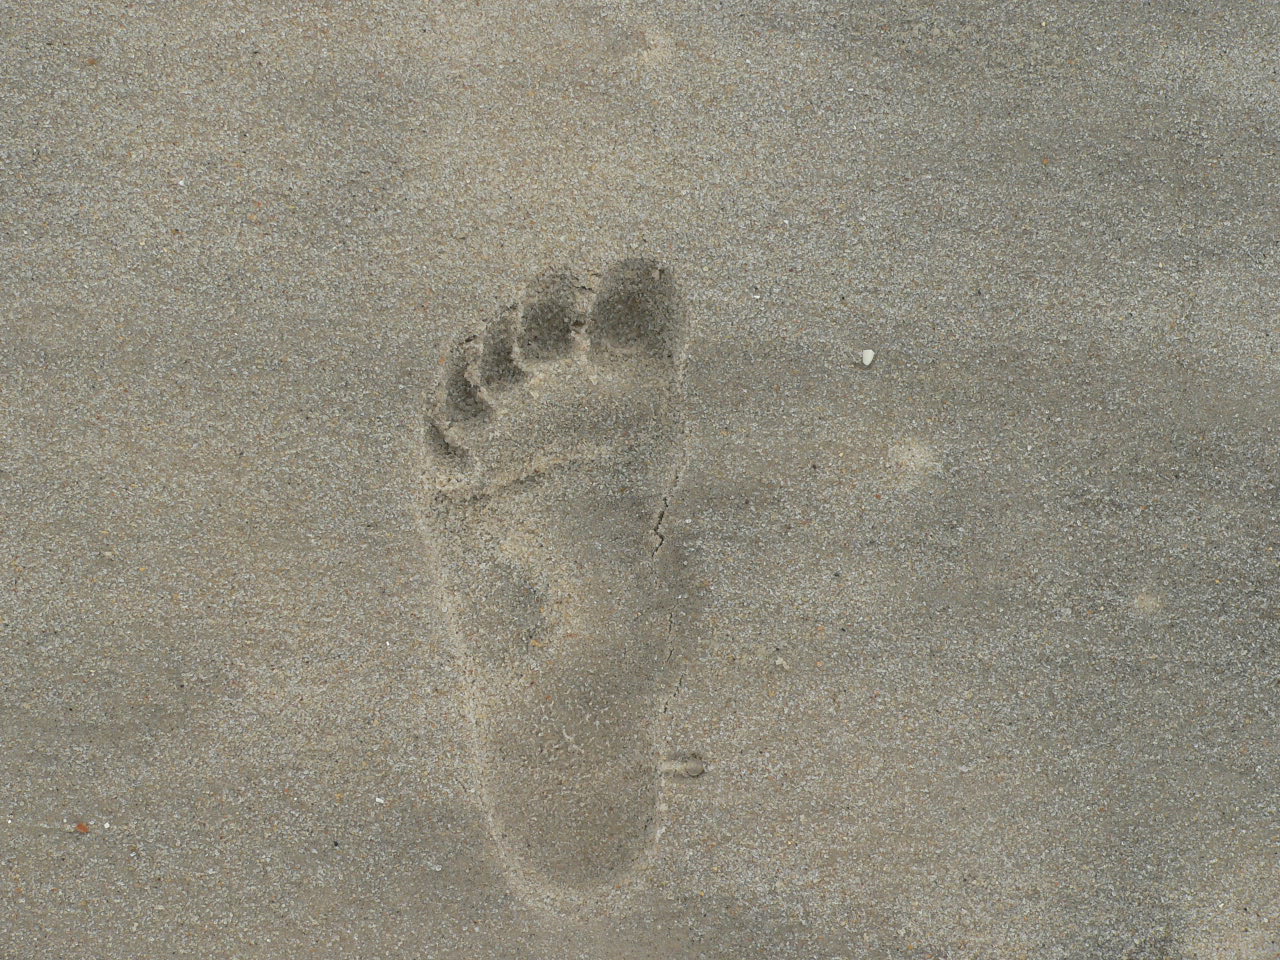 Foot print in Sand